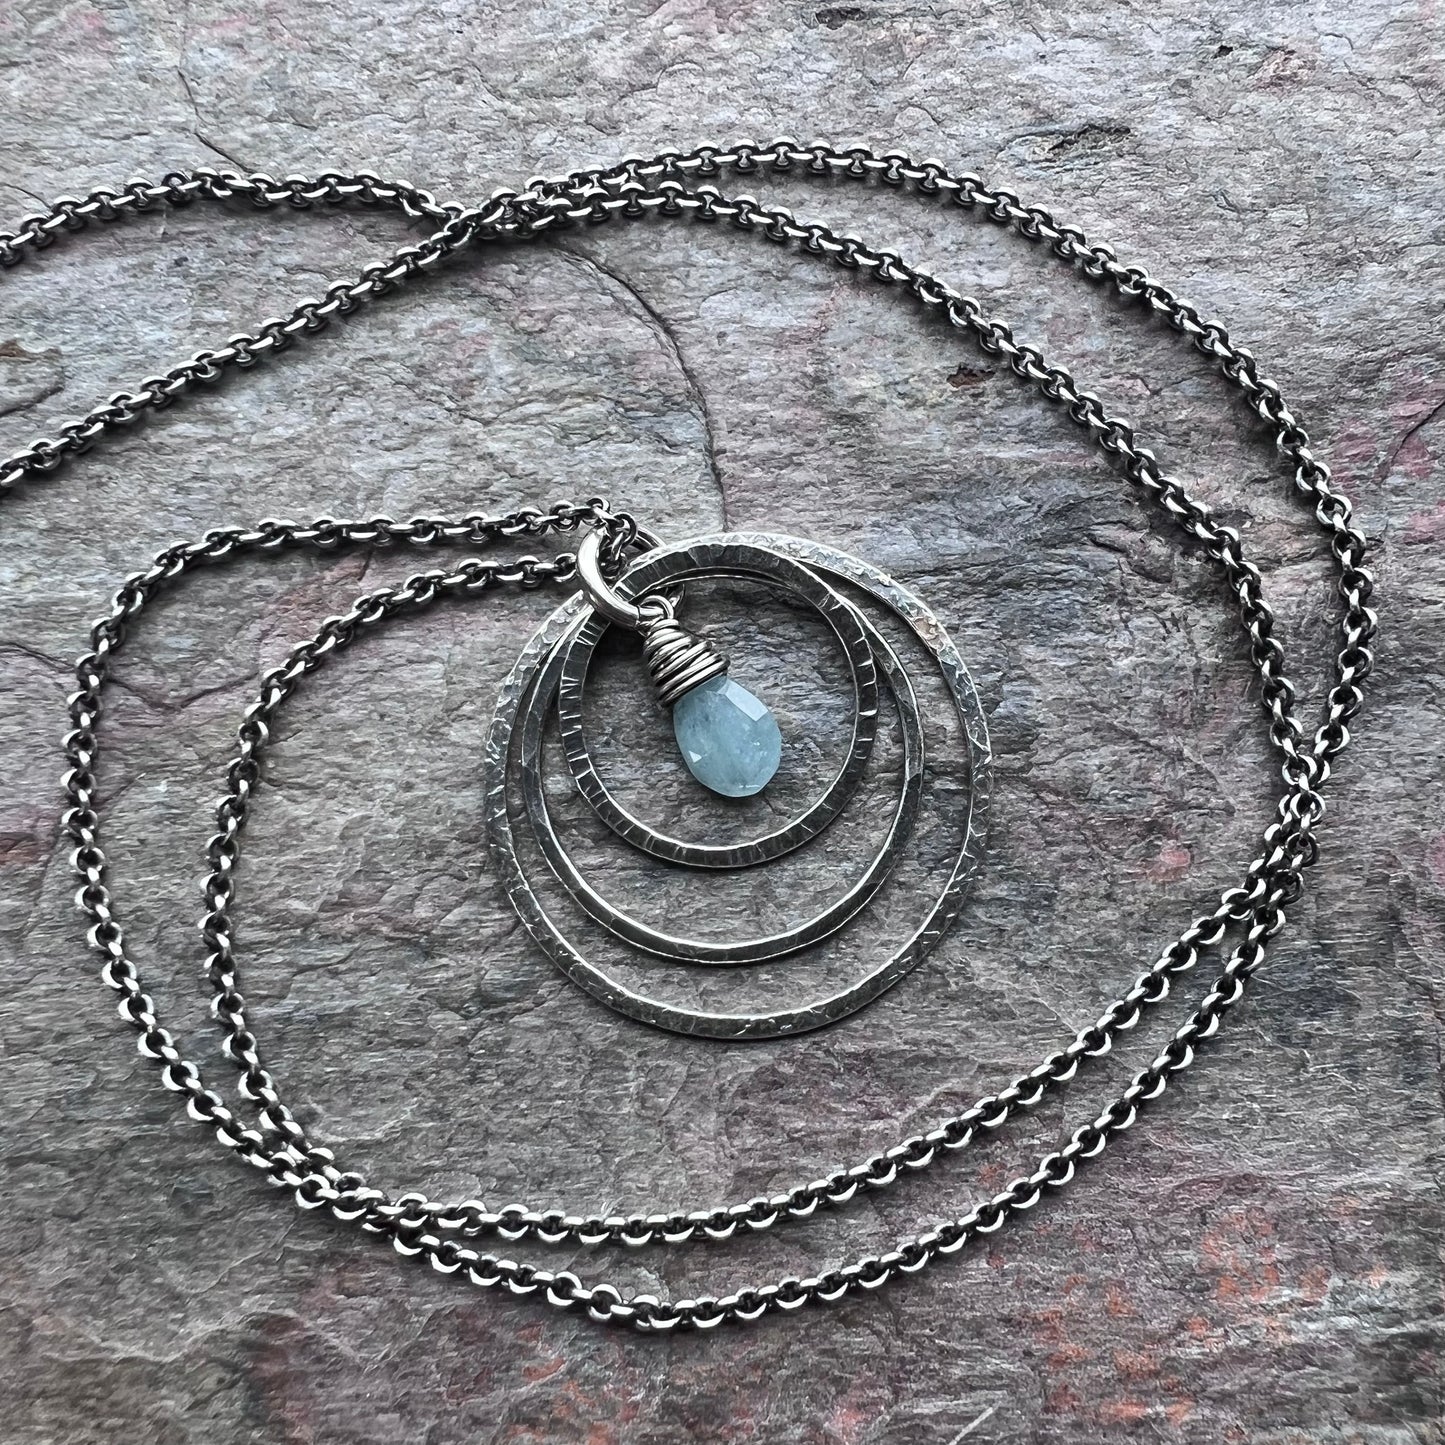 Aquamarine Sterling Silver Necklace - Genuine Aquamarine and Hammered Silver Rings Pendant on Sterling Silver Chain